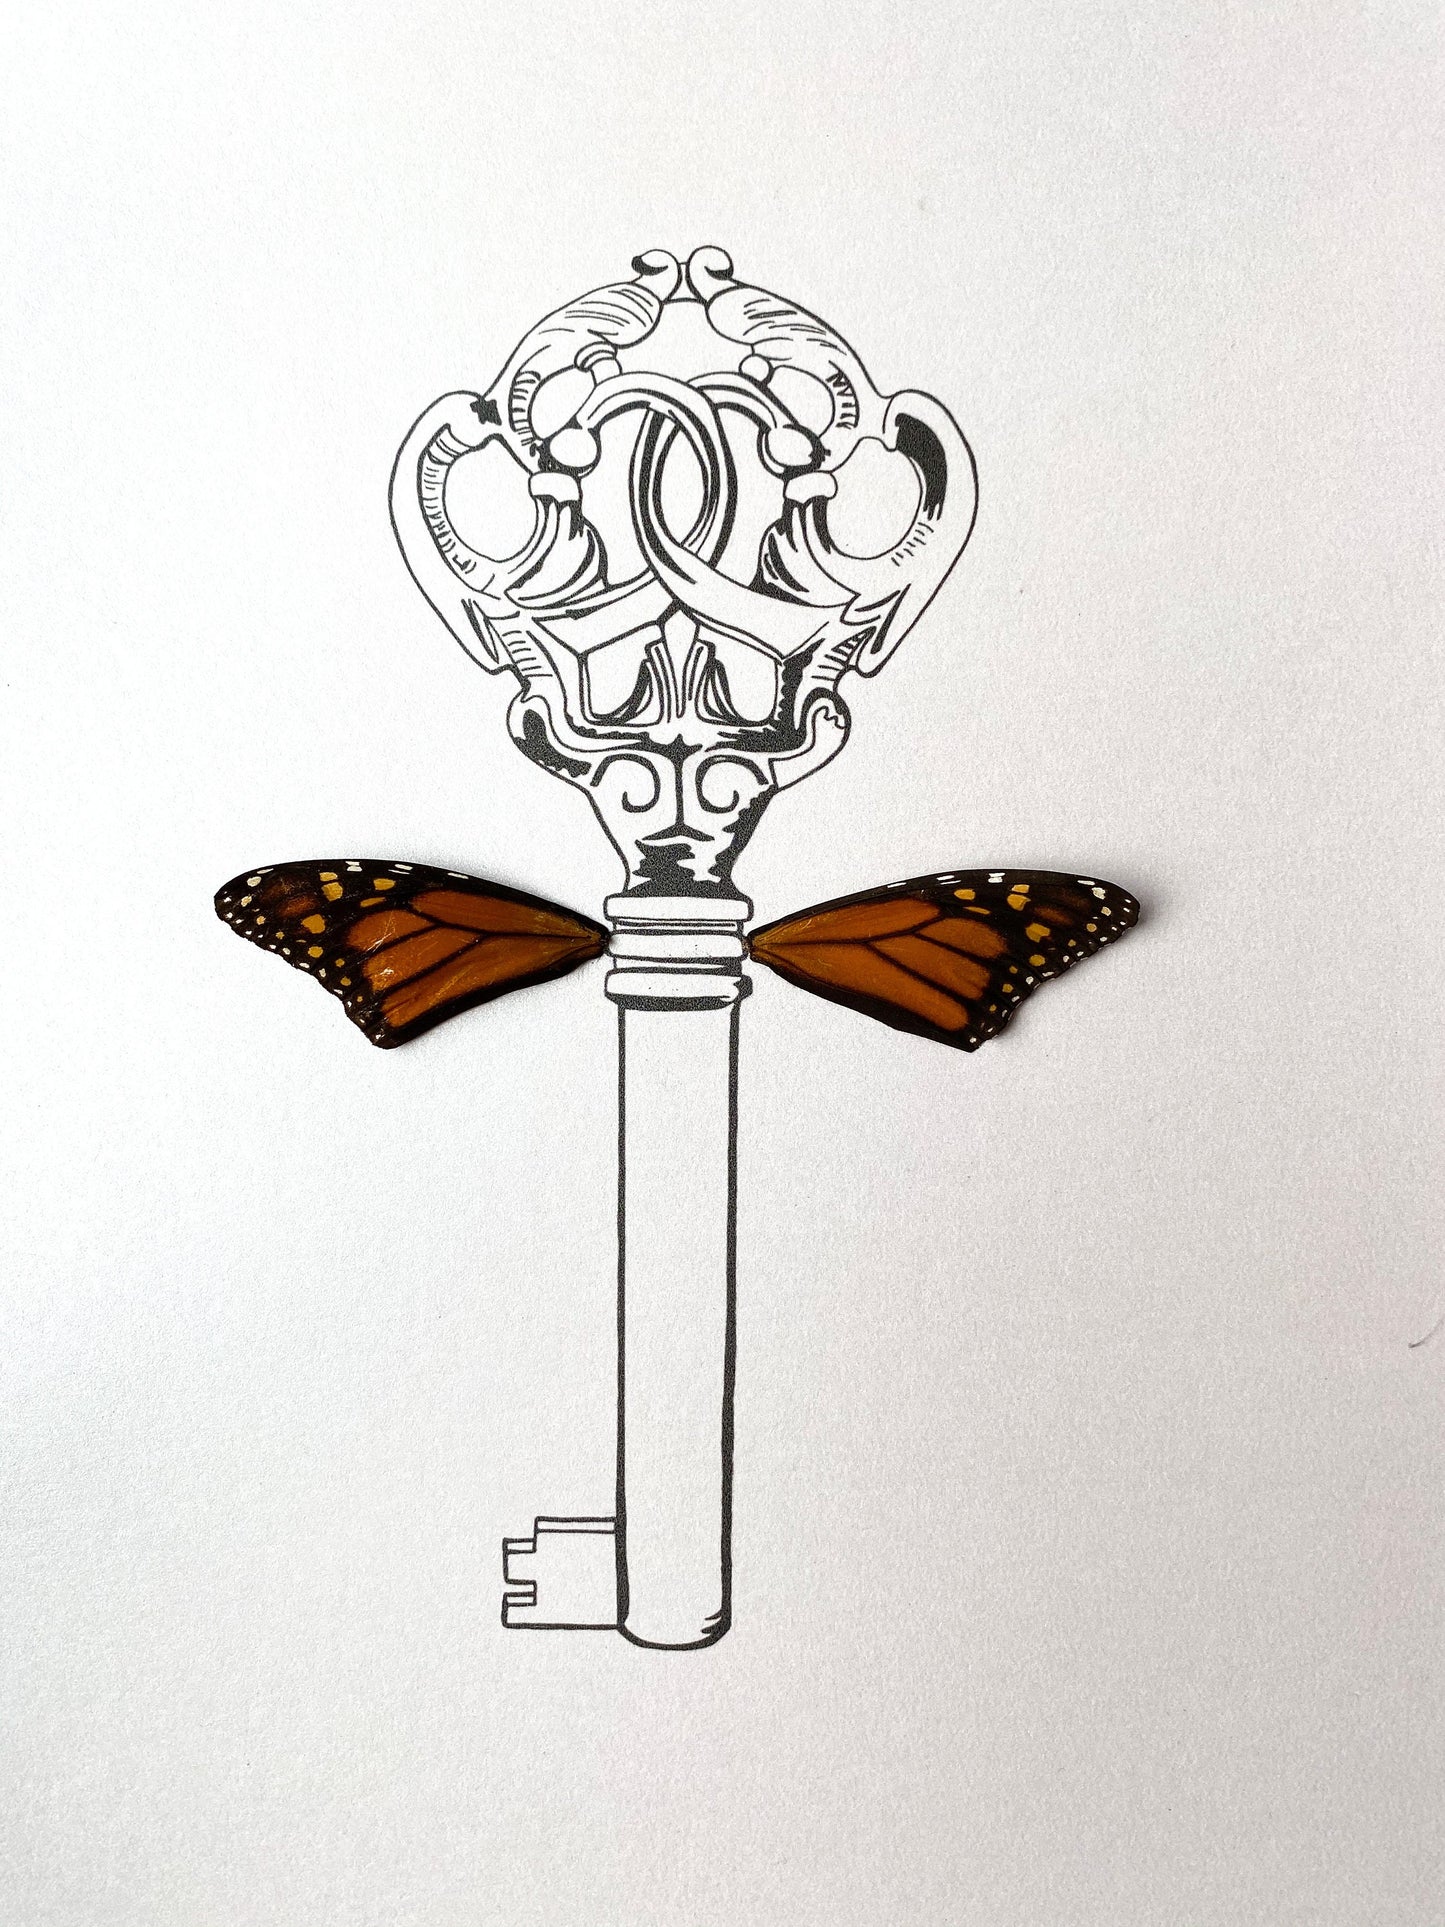 Flying Key with Wings Harry Potter Real Butterfly Wing Art Ethically Sourced Made in MN USA - Holly Ulm - Isms Butterfly Conservation Art